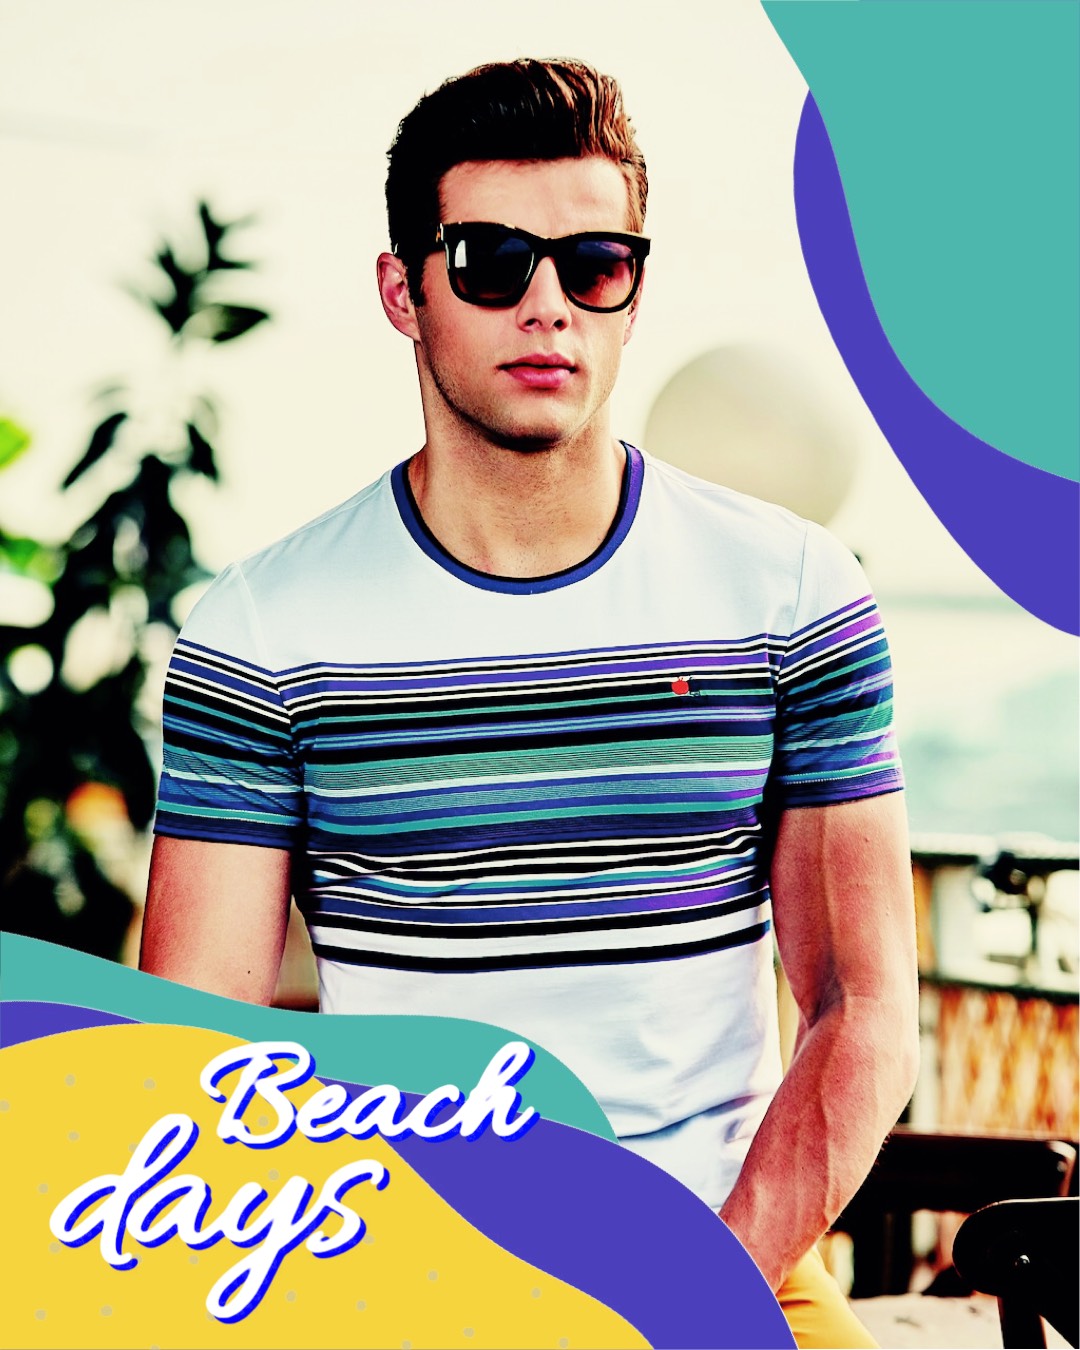 A Man In A Striped Shirt And Sunglasses Retro Summer Template